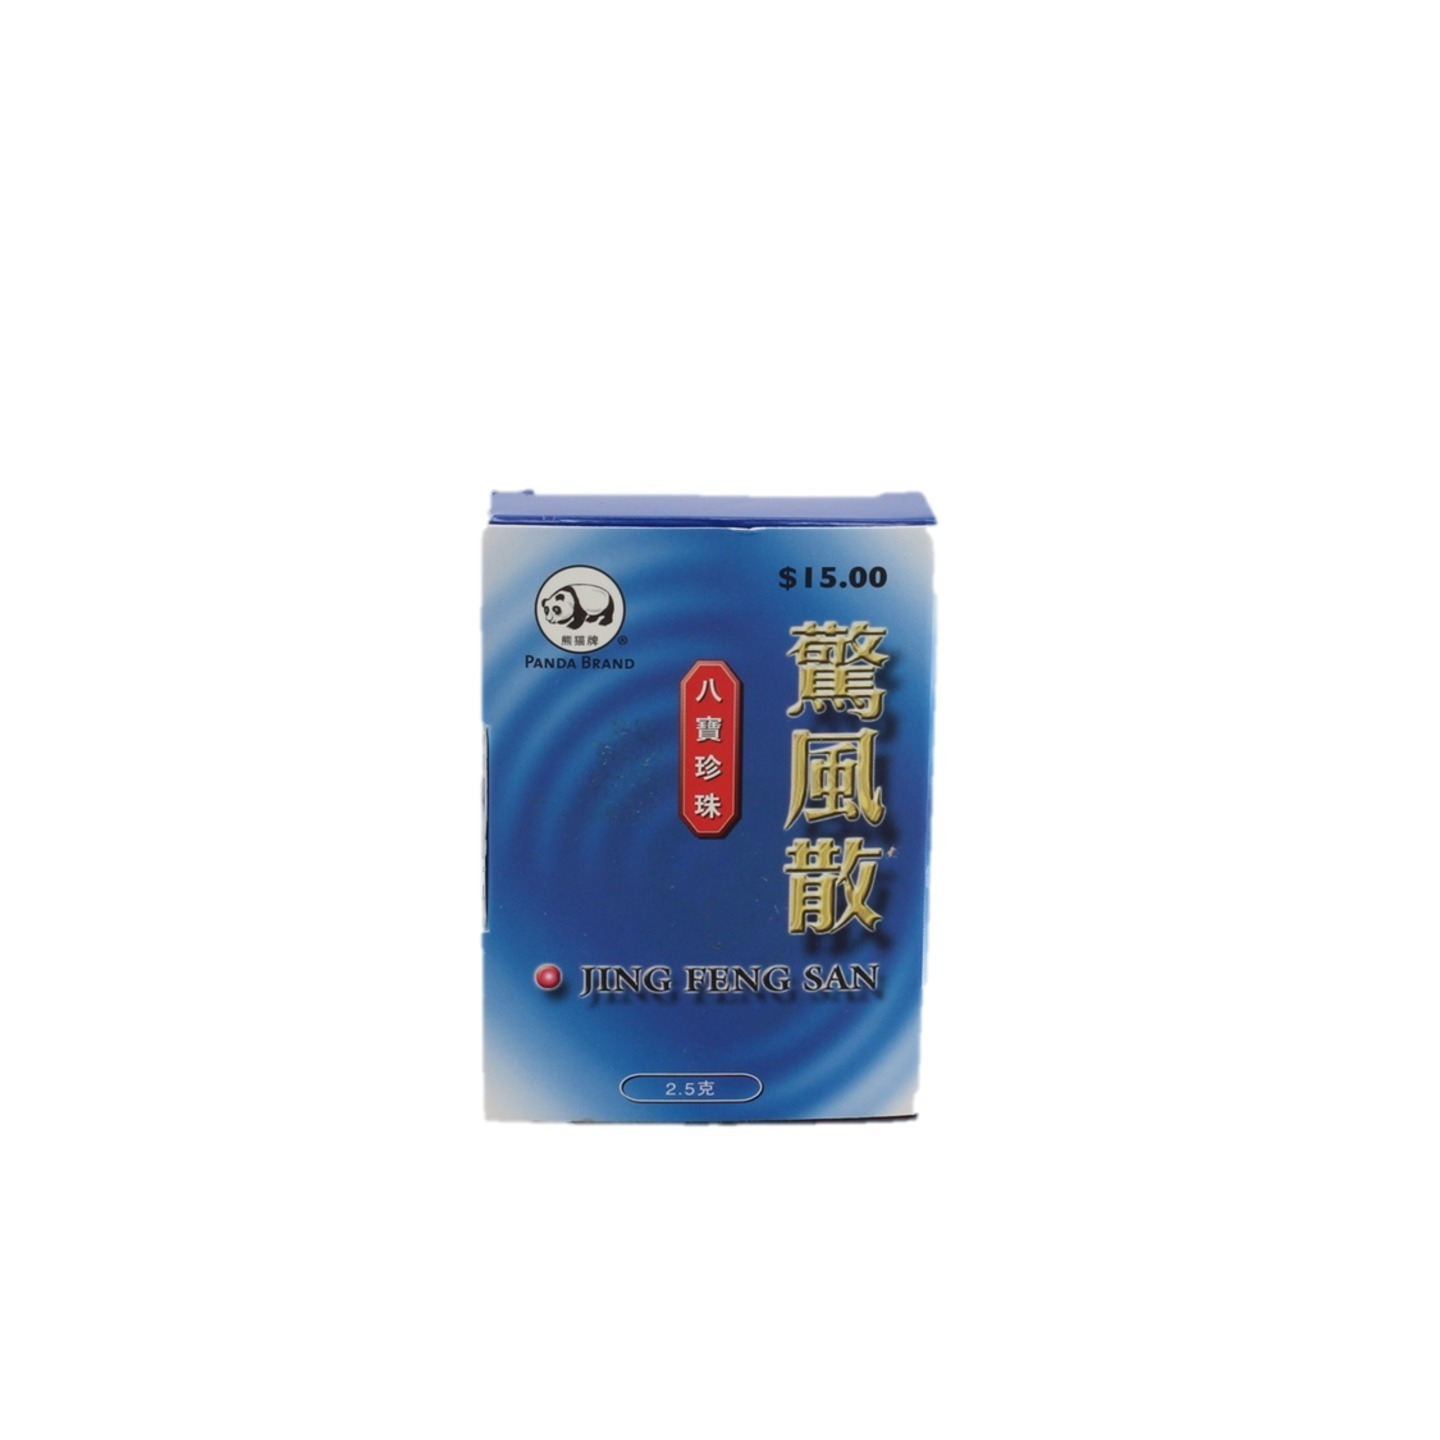 Jing Feng San  2.5g  驚风散 SGD15.00 PROMOTION FOR 4